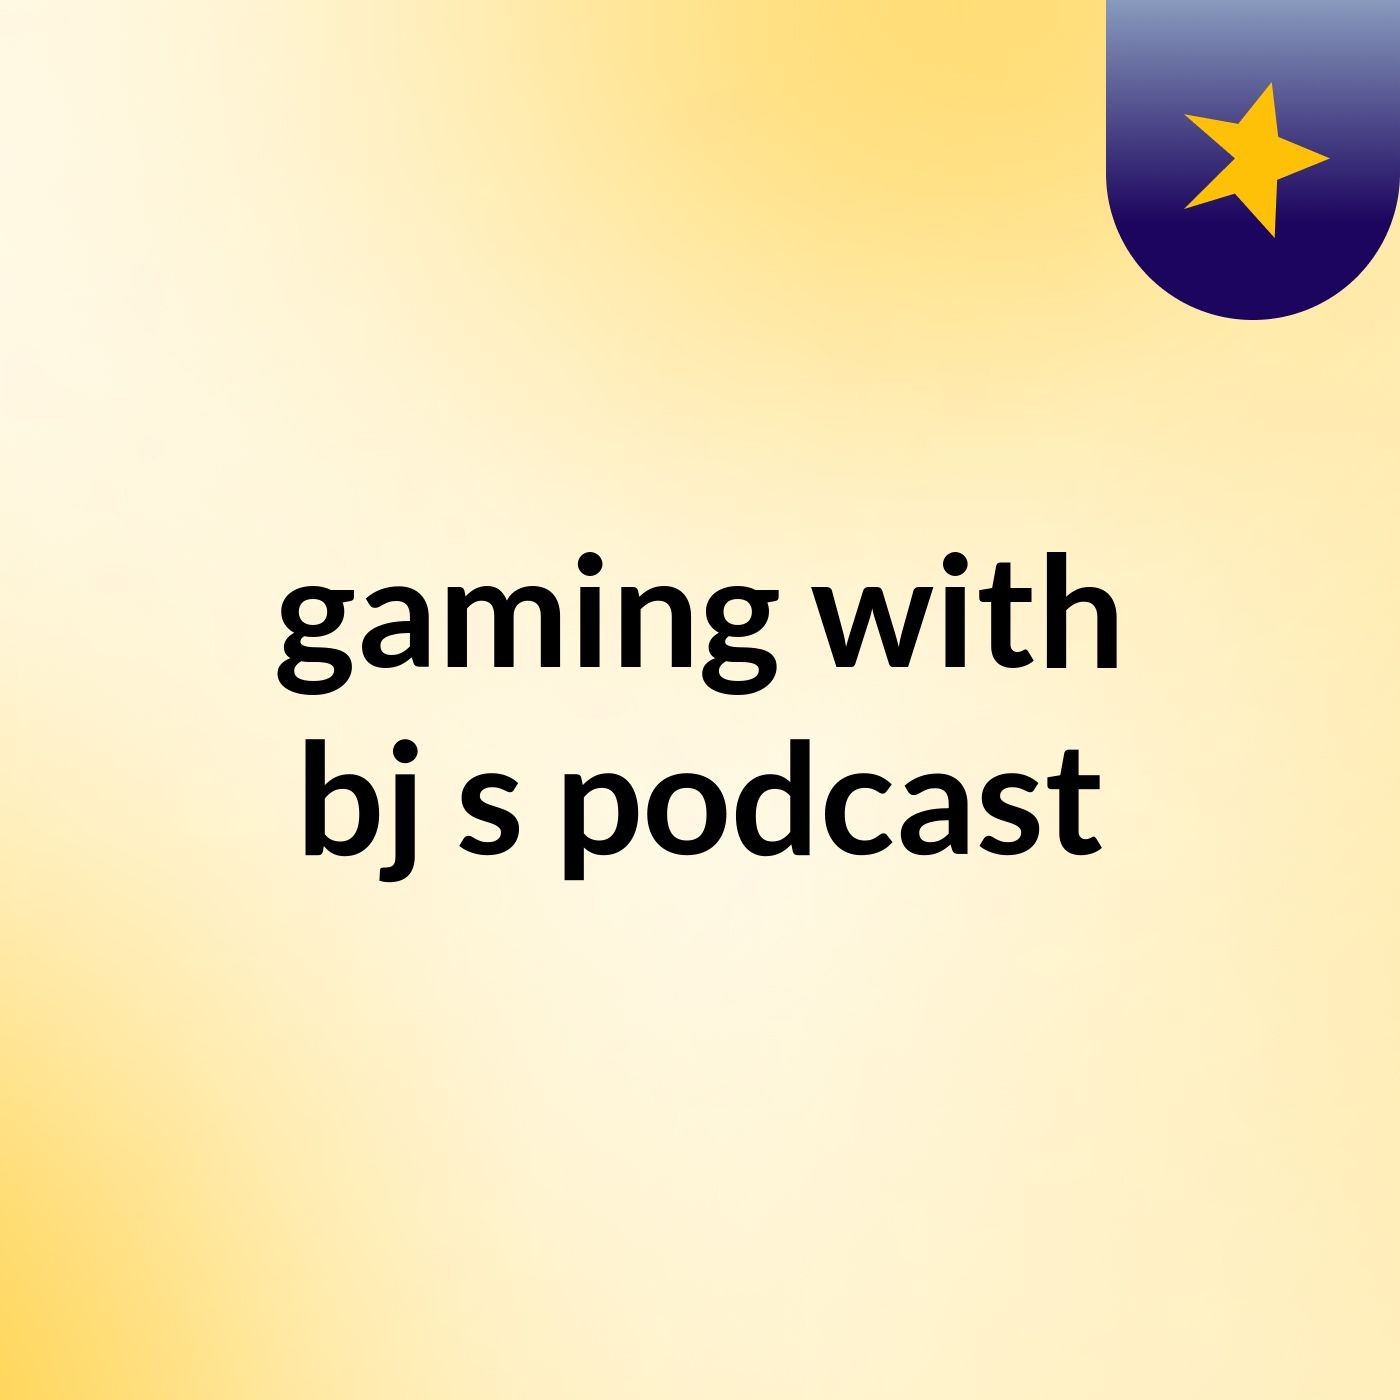 Episode 4 - gaming with bj's podcast